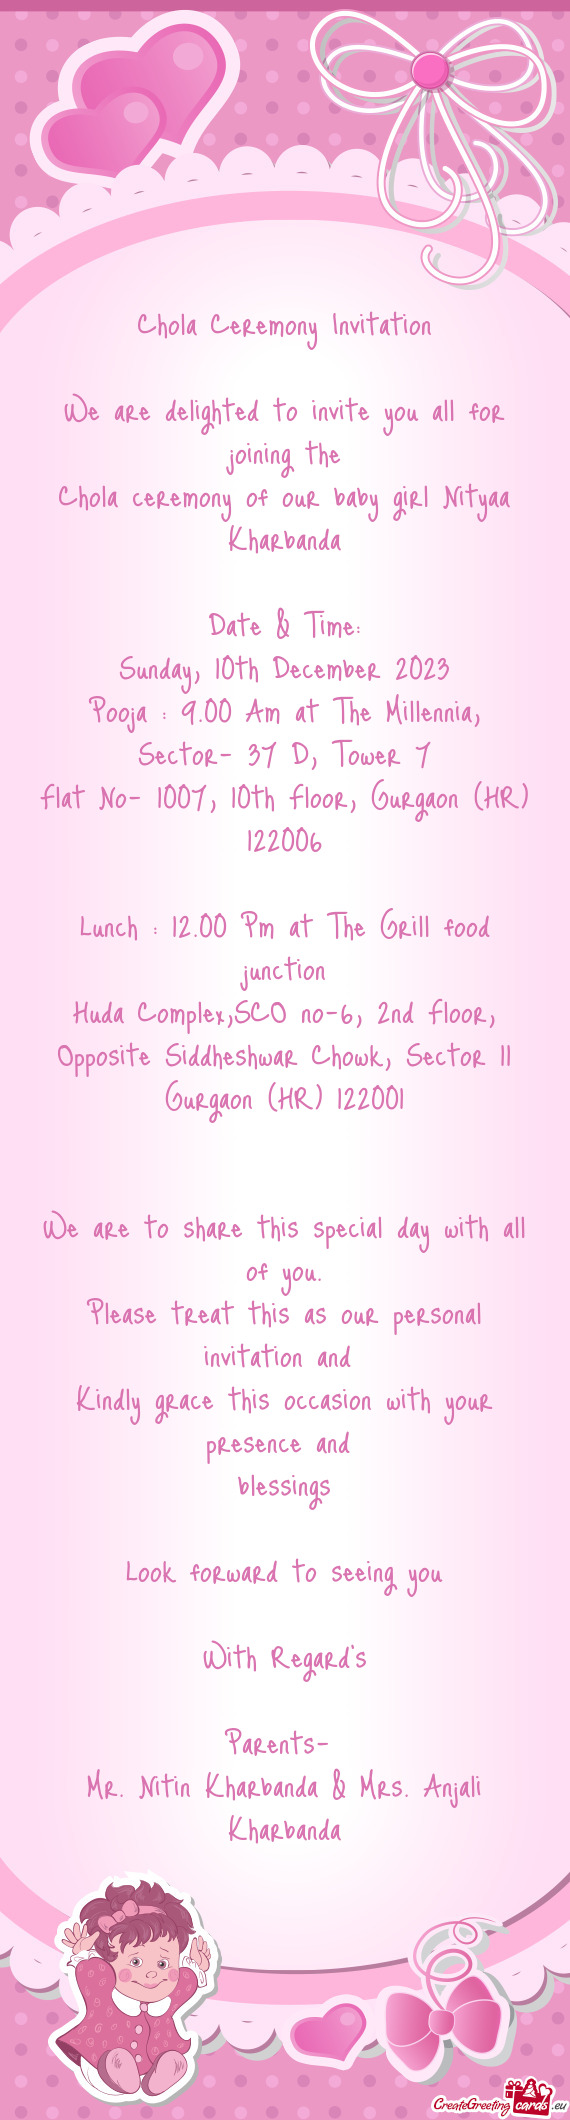 Lunch : 12.00 Pm at The Grill food junction